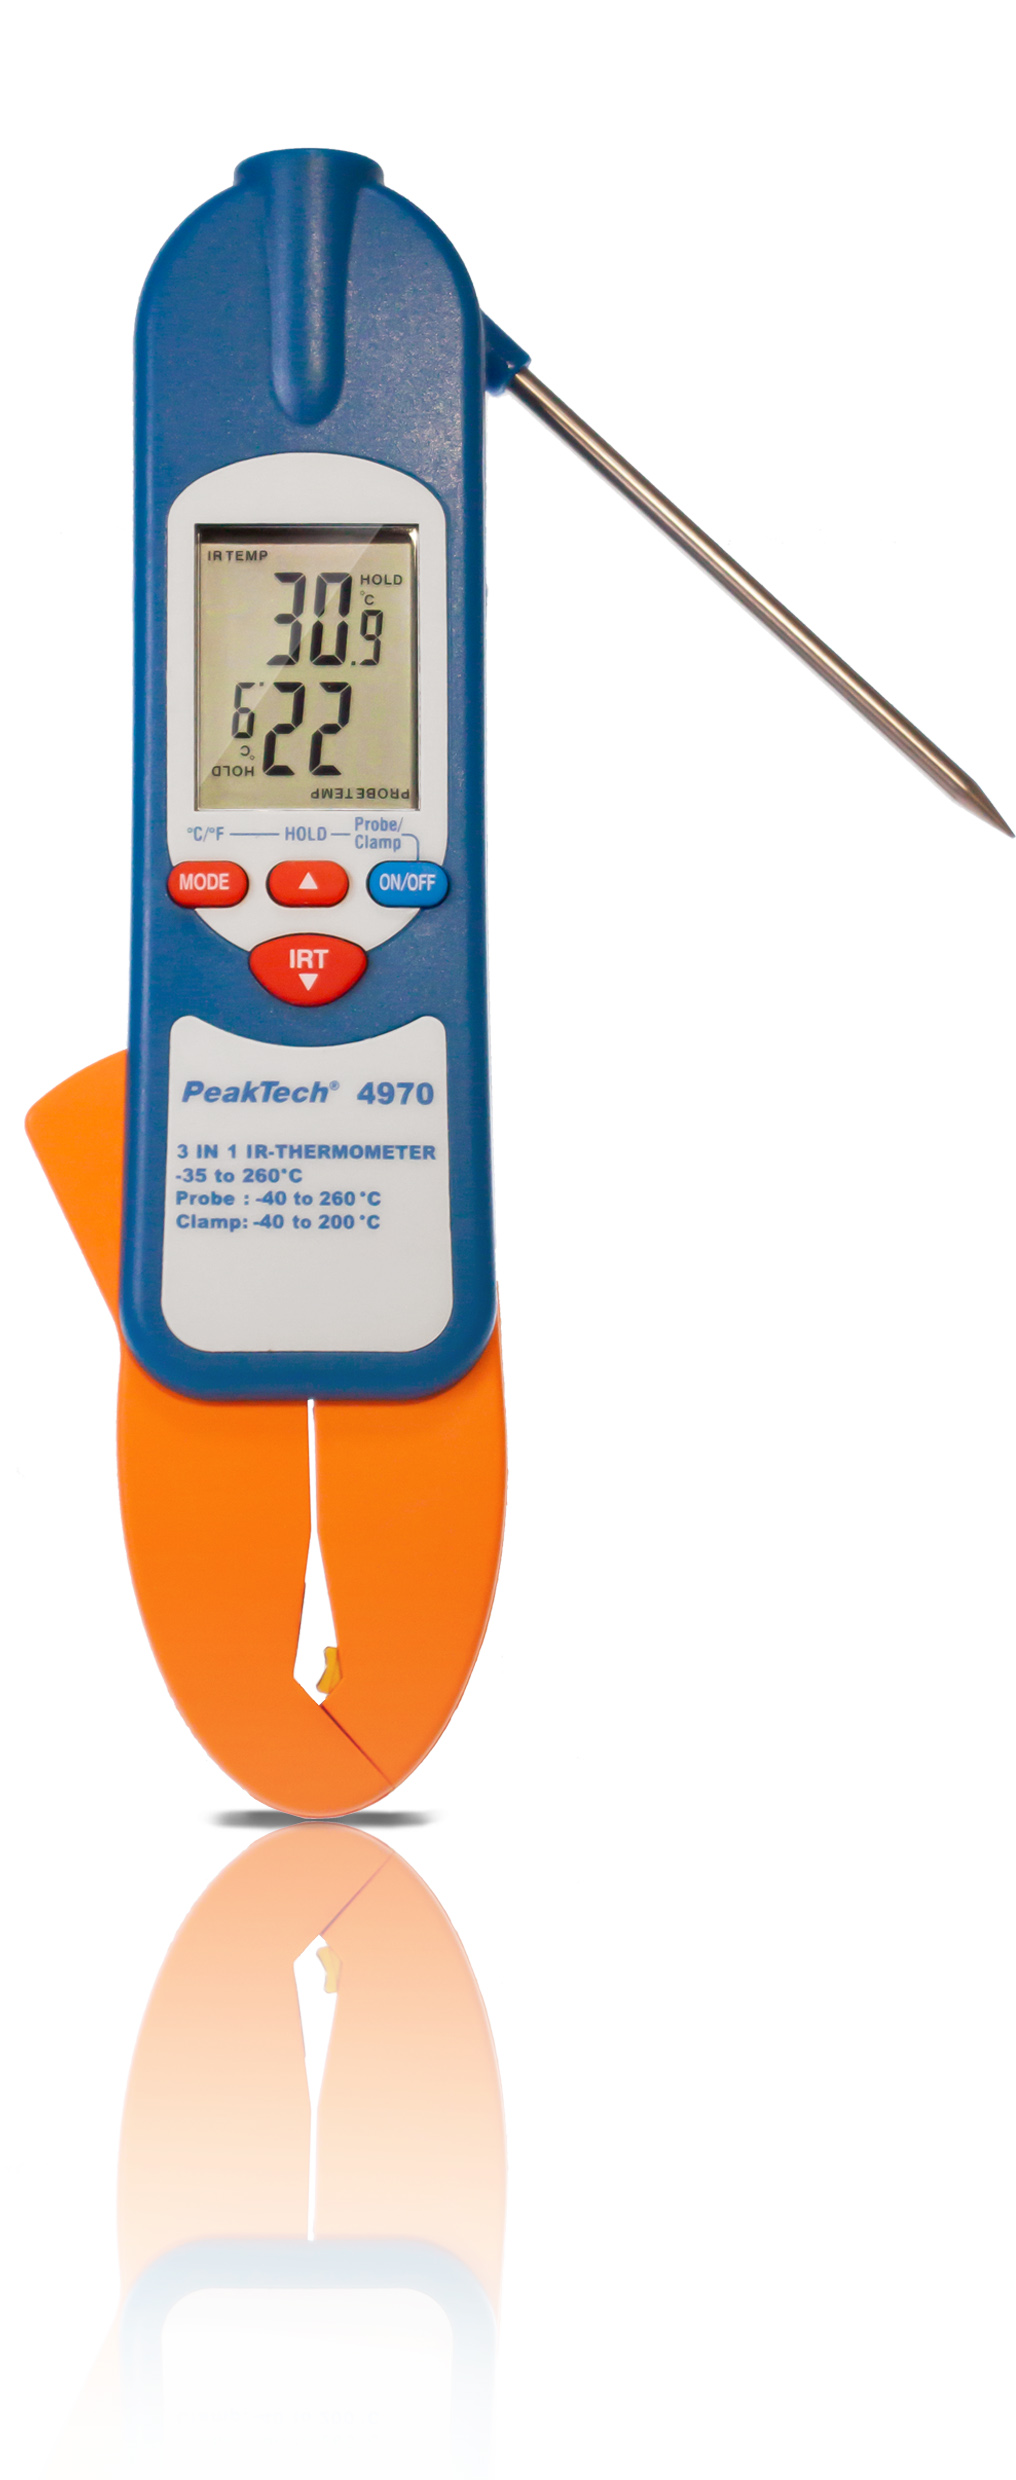 «PeakTech® P 4970» 3 in 1 IR-Thermometer